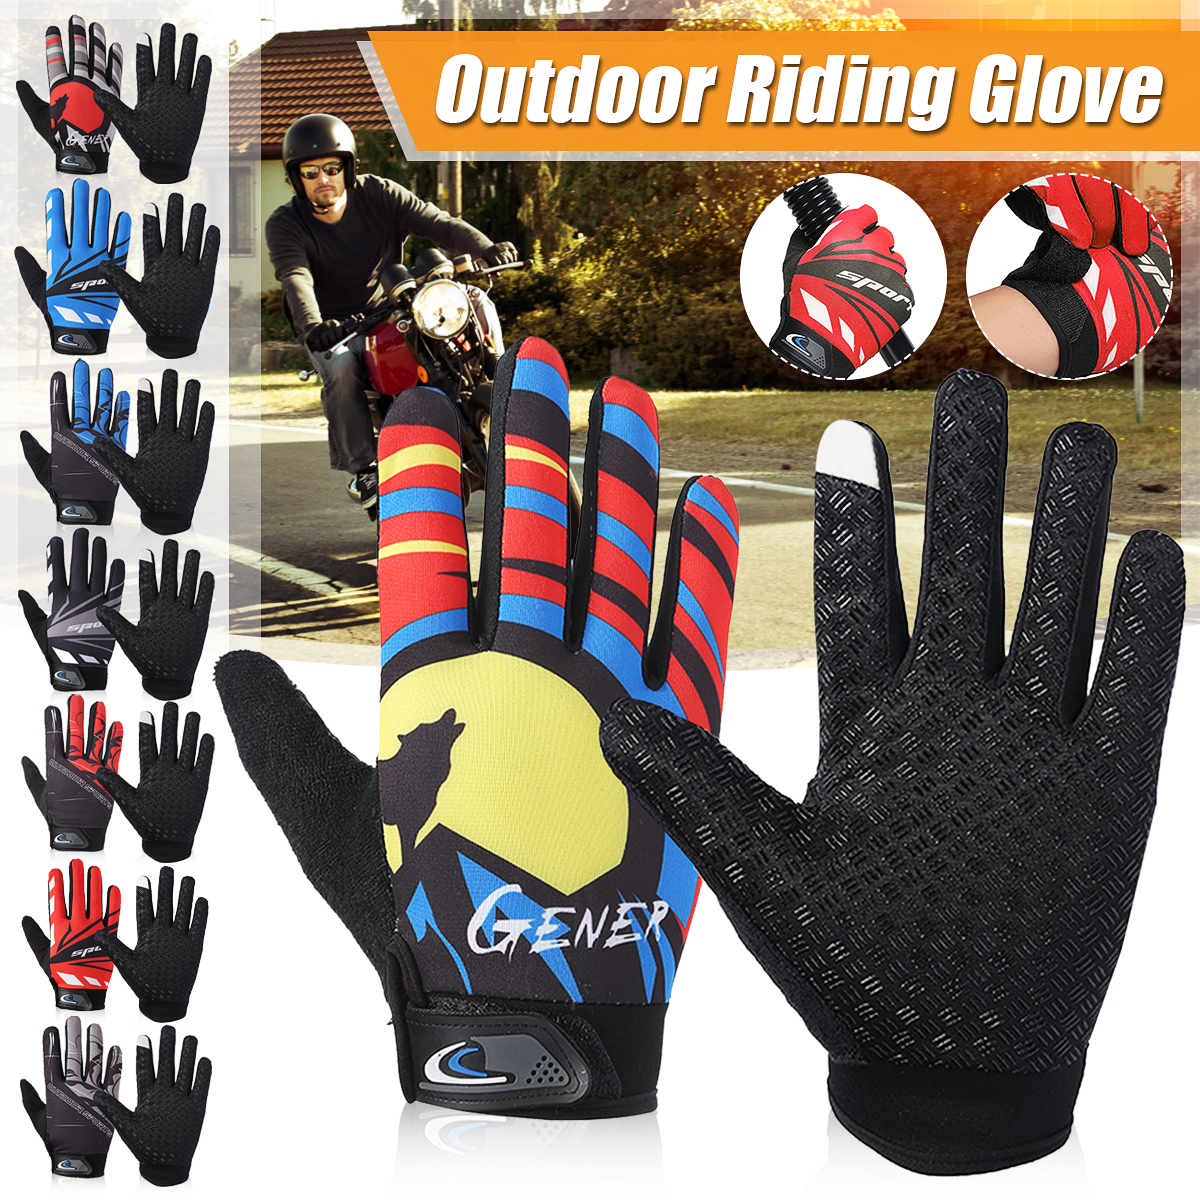 Windproof-Touch-Screen-Gloves-Breathable-Warm-Full-Finger-Gloves-Winter-Warmer-for-Outdoor-Riding-Mo-1602930-2